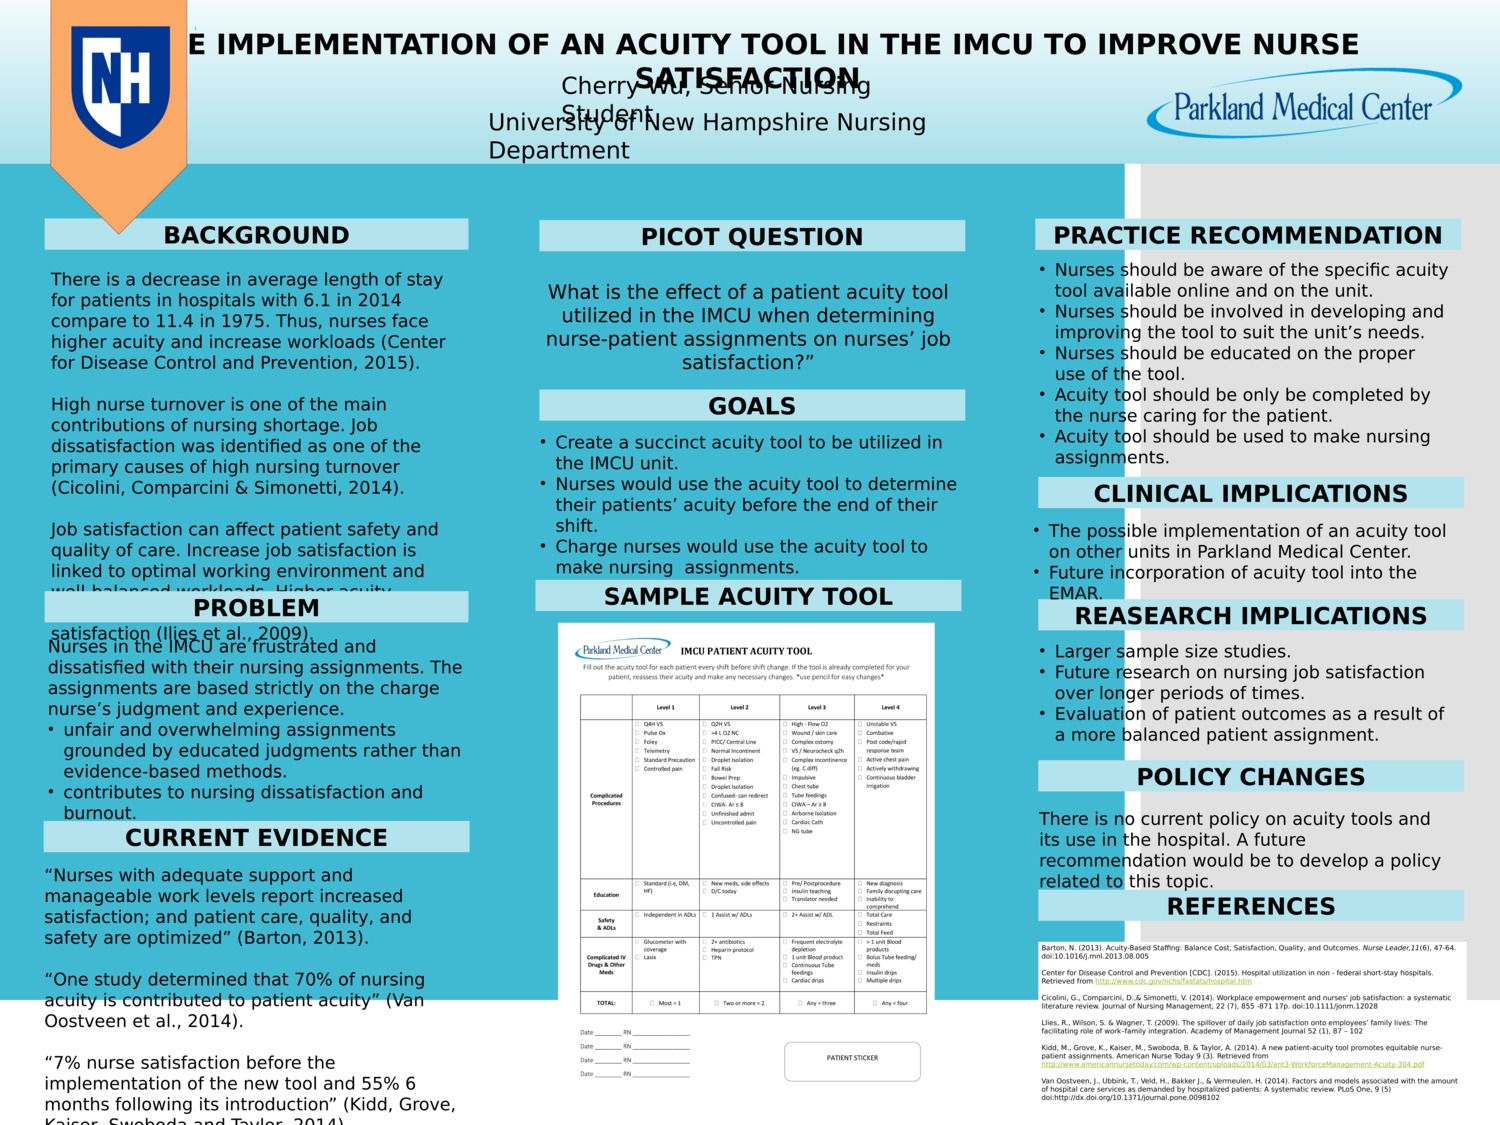 The Implementation Of An Acuity Tool In The Imcu To Improve Nurse Satisfaction  by clw1005